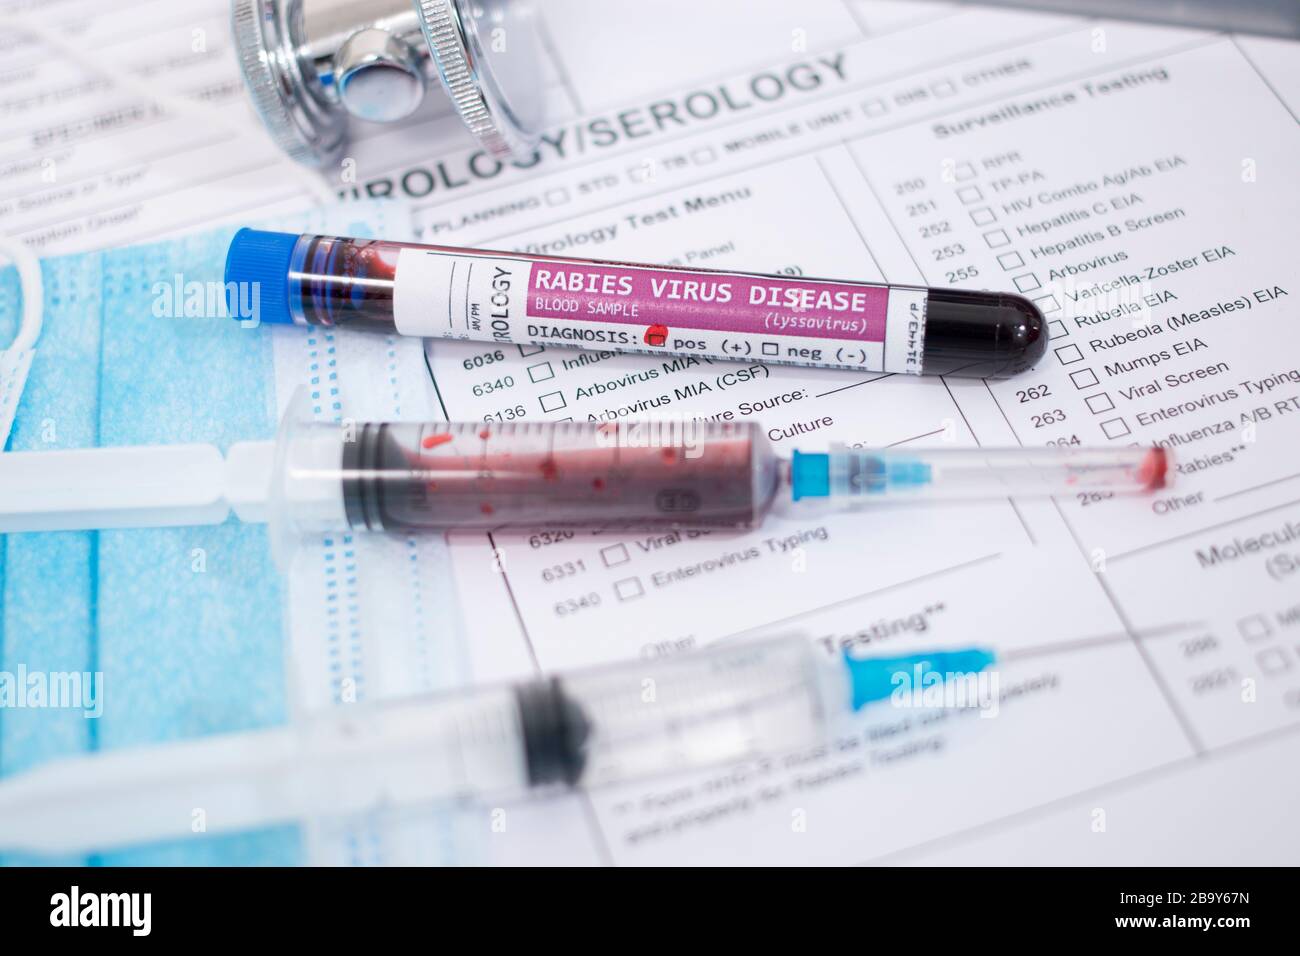 Fictional Blood samples with infected rabies virus, with mask, syringe and lab report. Stock Photo